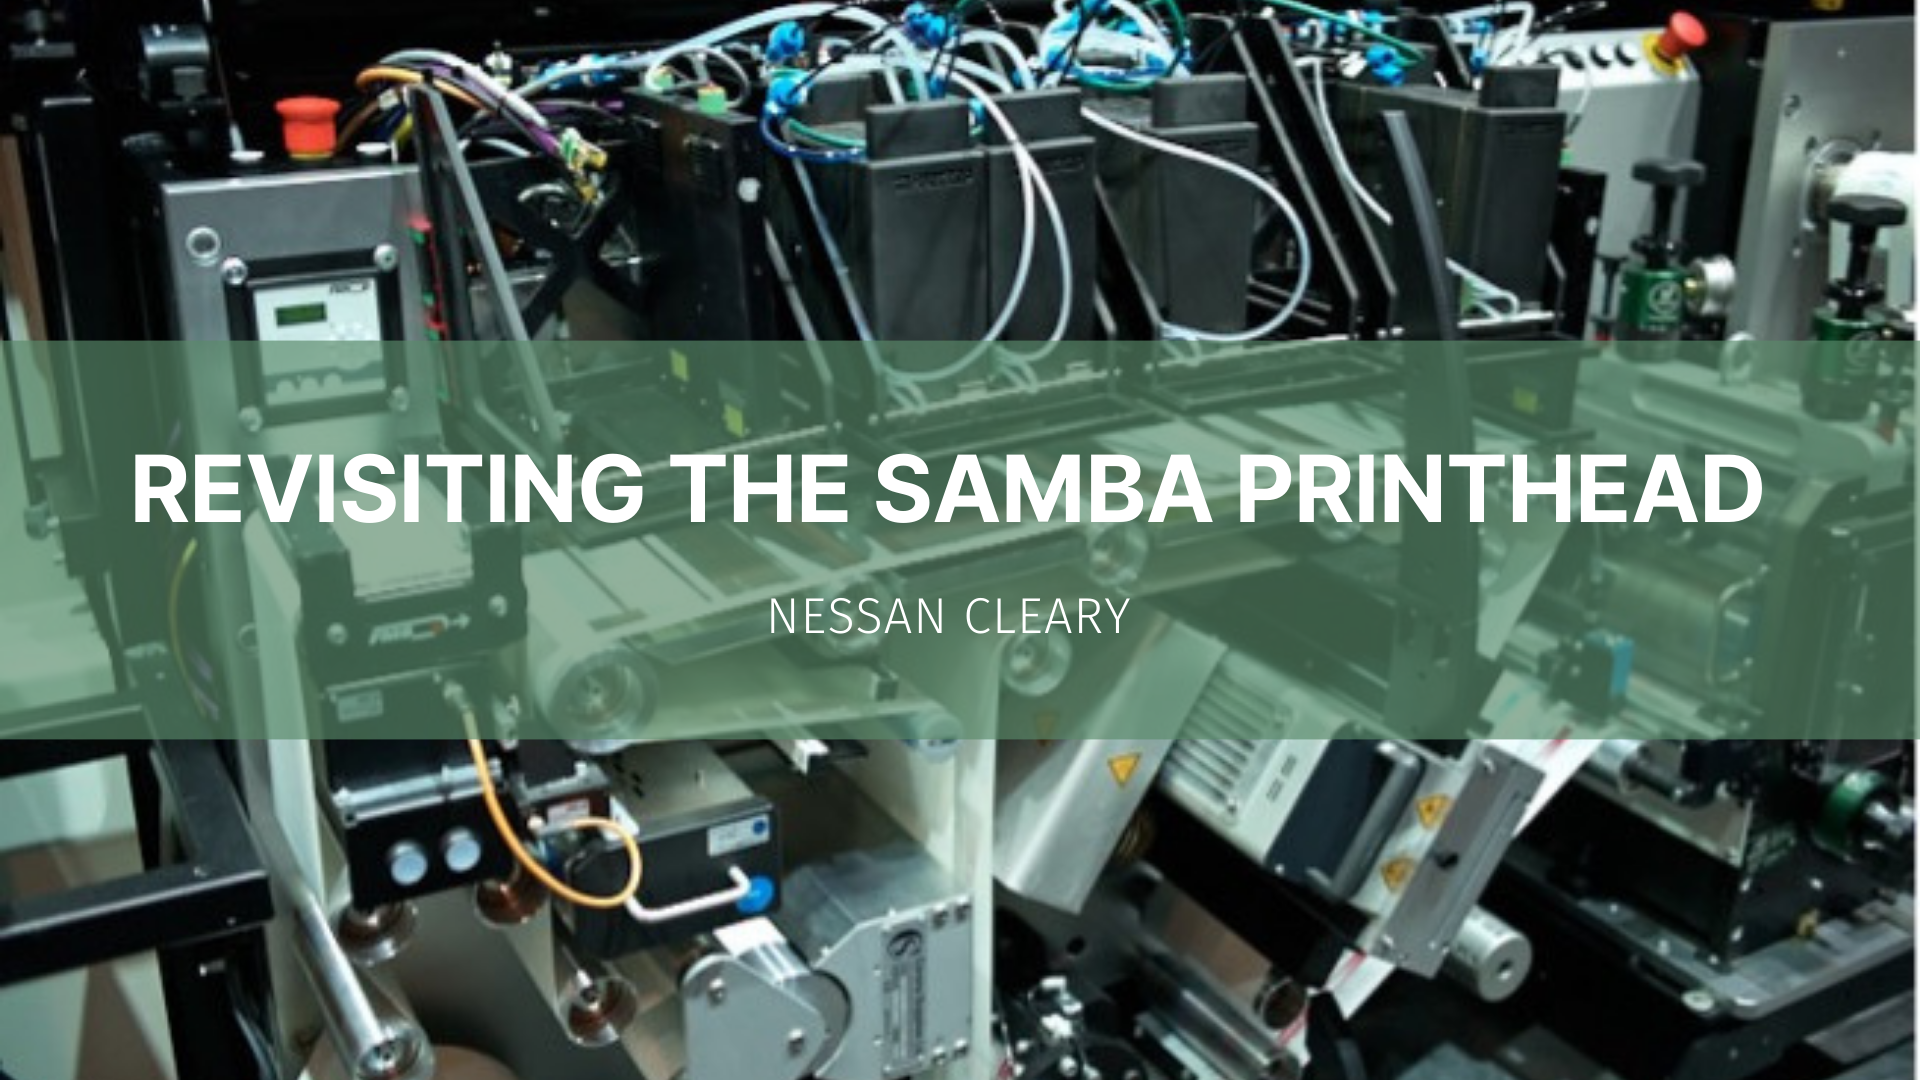 Featured image for “Revisiting the Samba printhead”